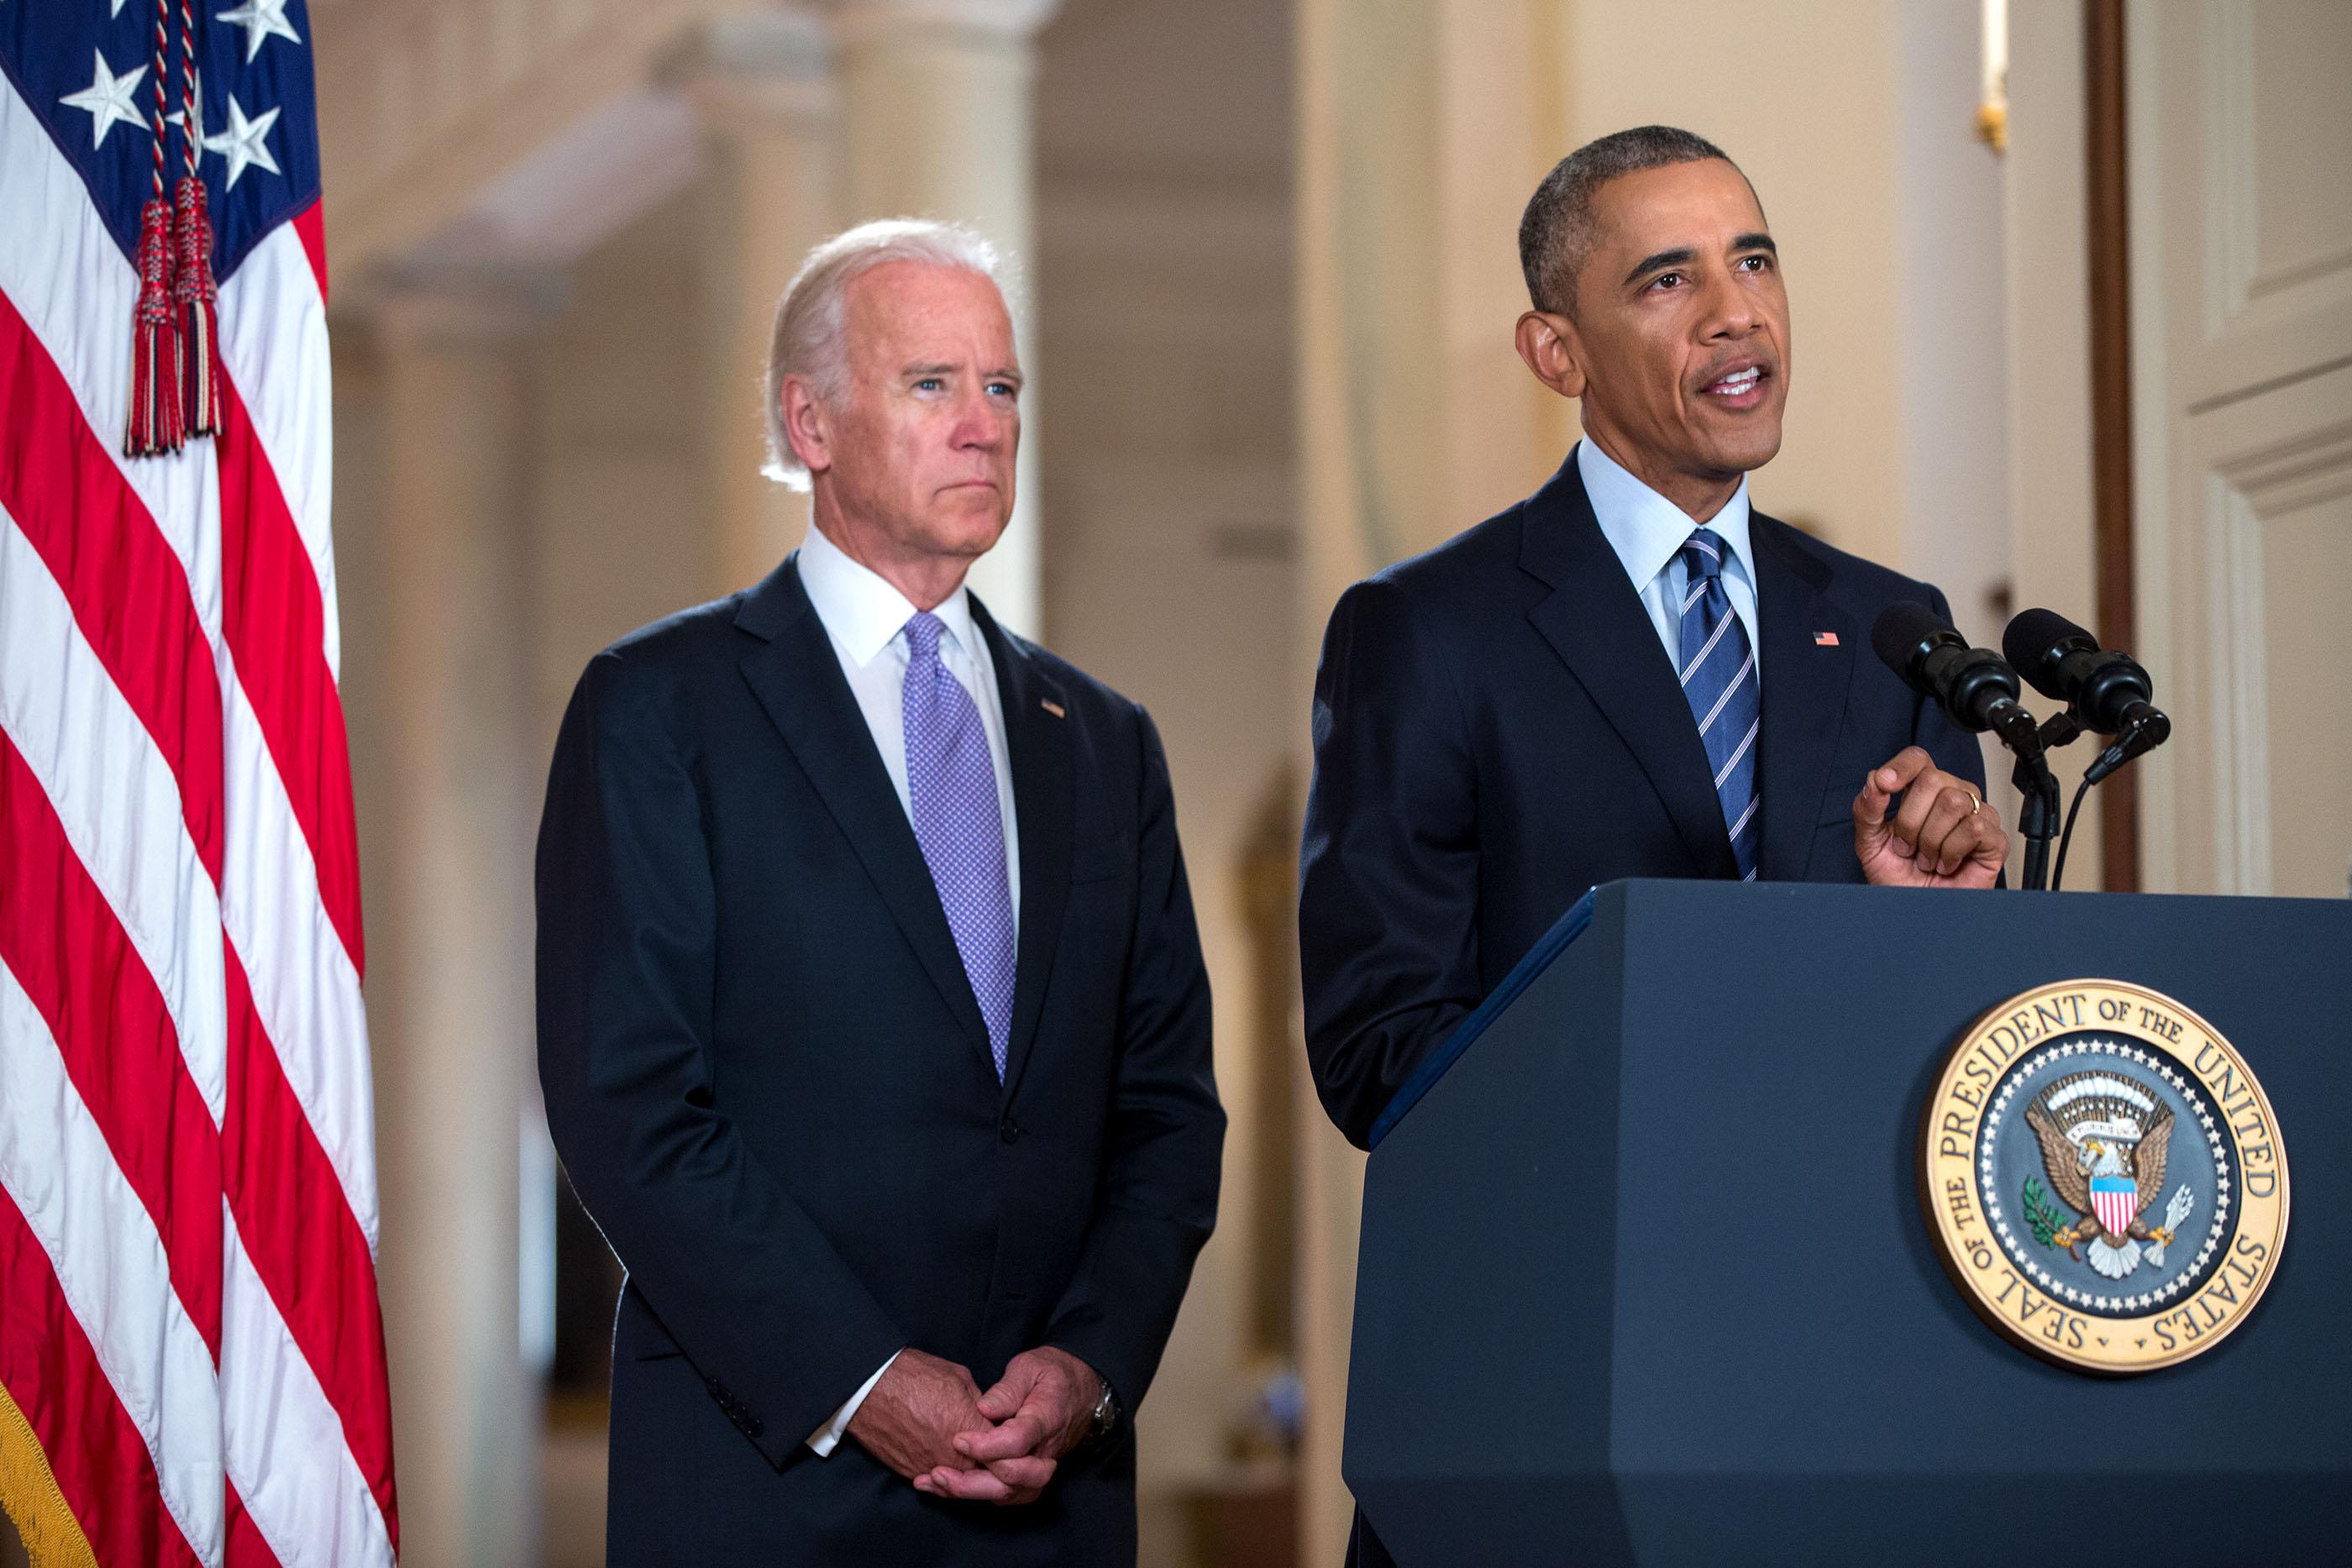 Former U.S. President Barack Obama flanked by Vice President Joe Biden delivers a statement on the Iran nuclear agreement in the East Room of the White House on July 14 2015 (White House)